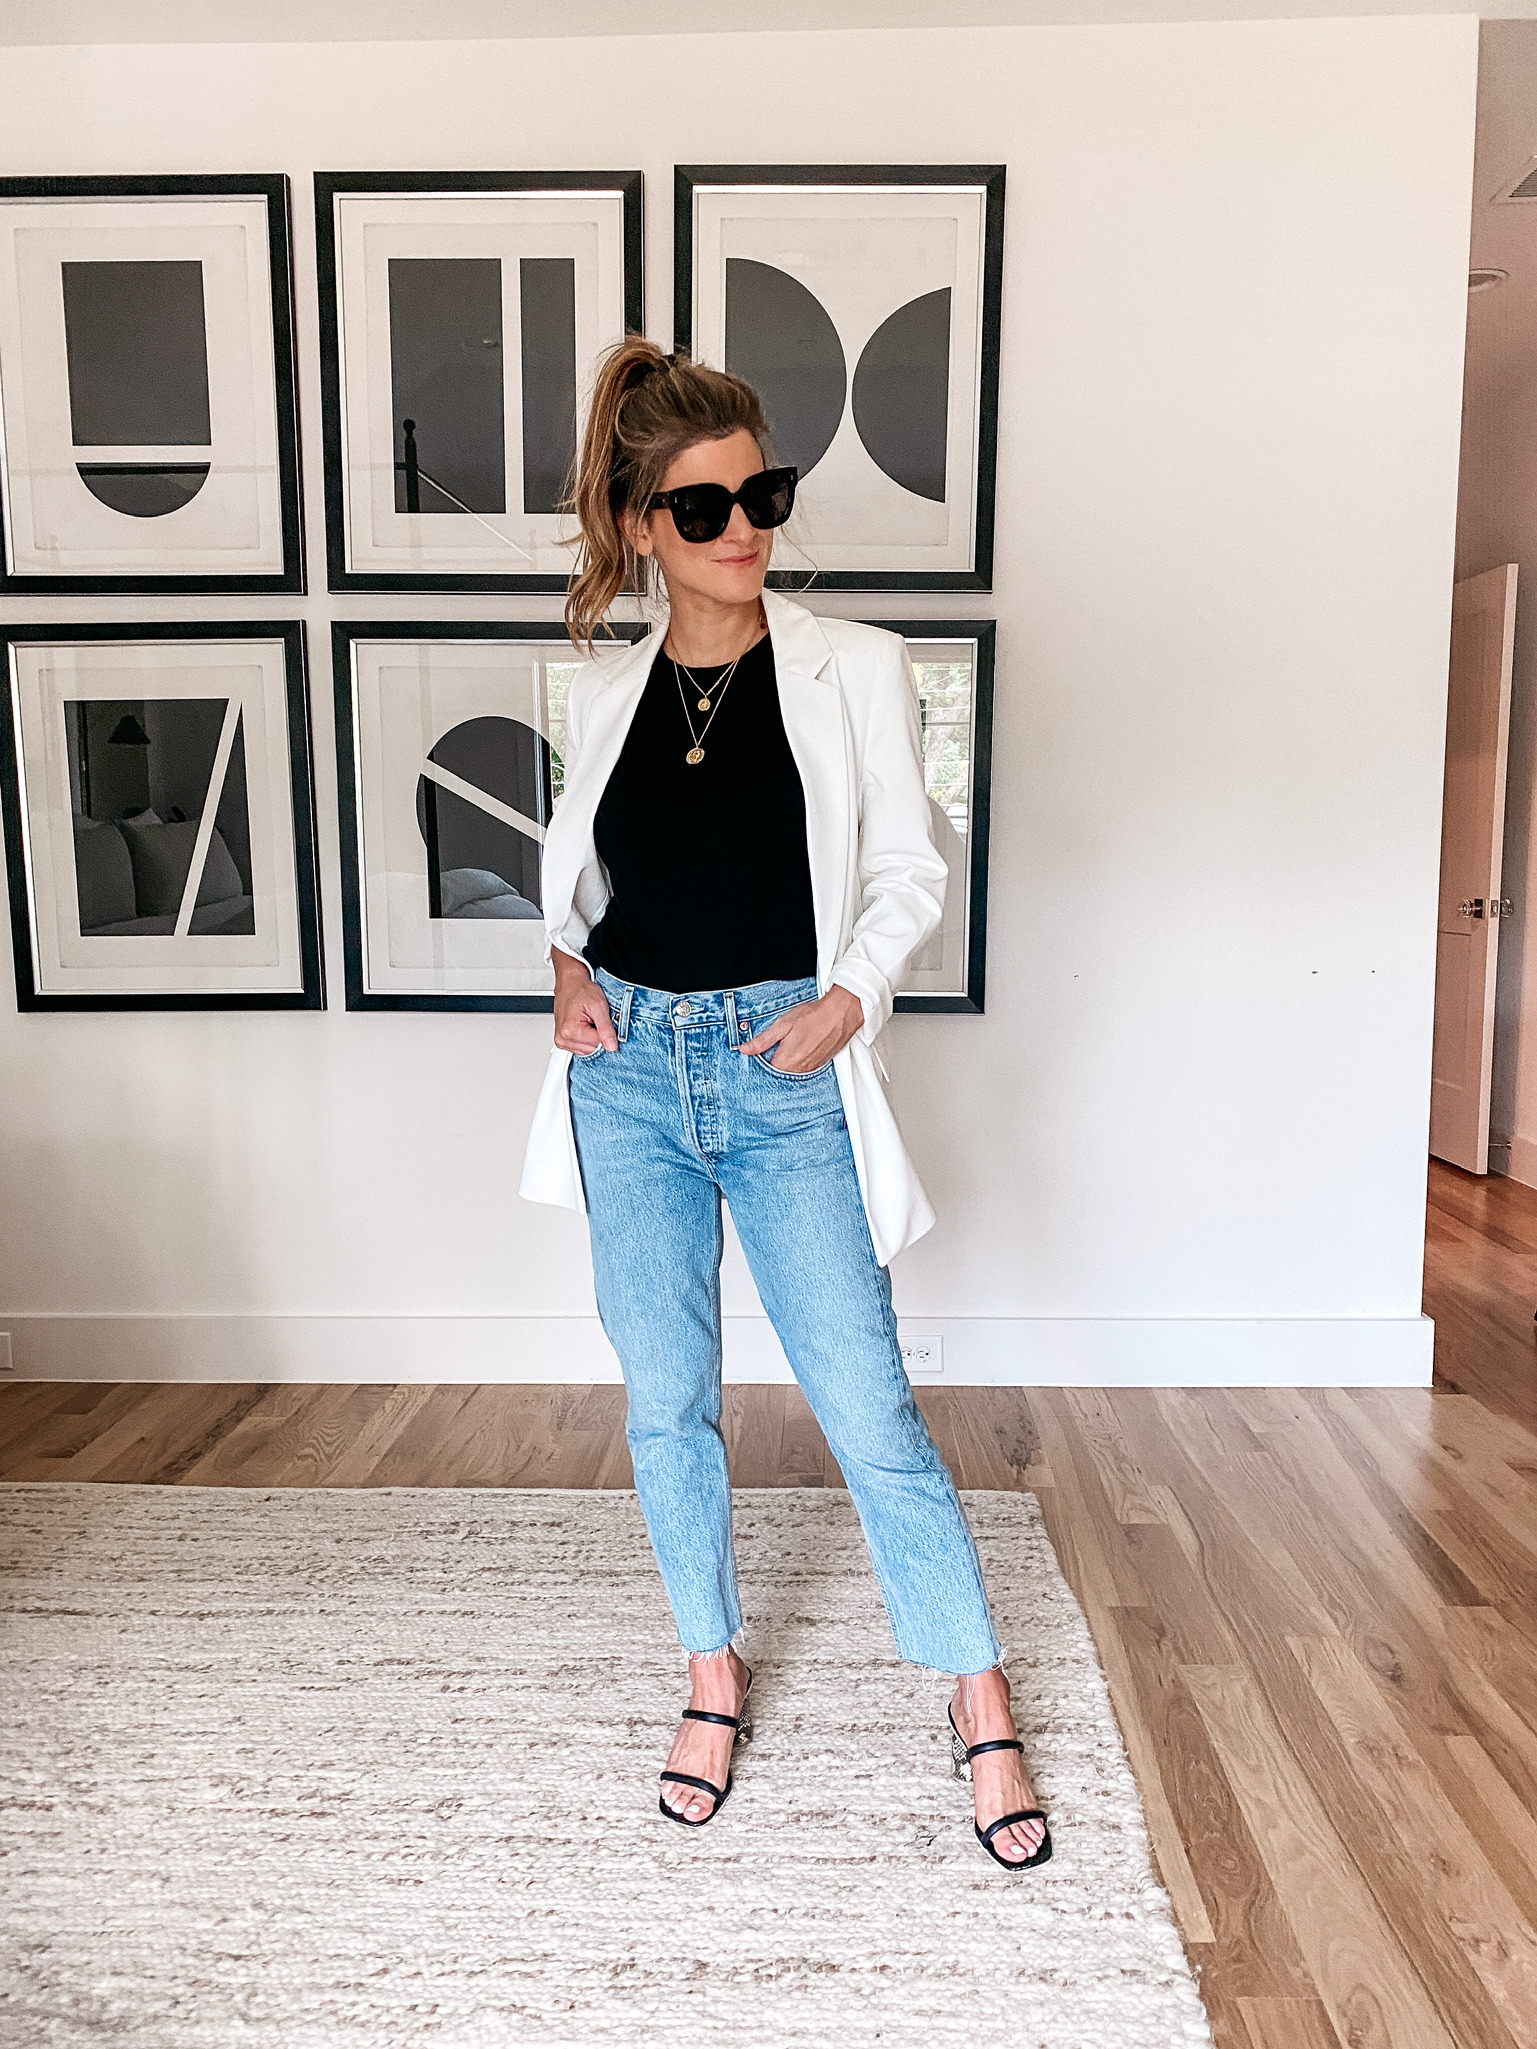 Brighton Butler wearing white blazer, black tee and light wash jeans with sunglasses